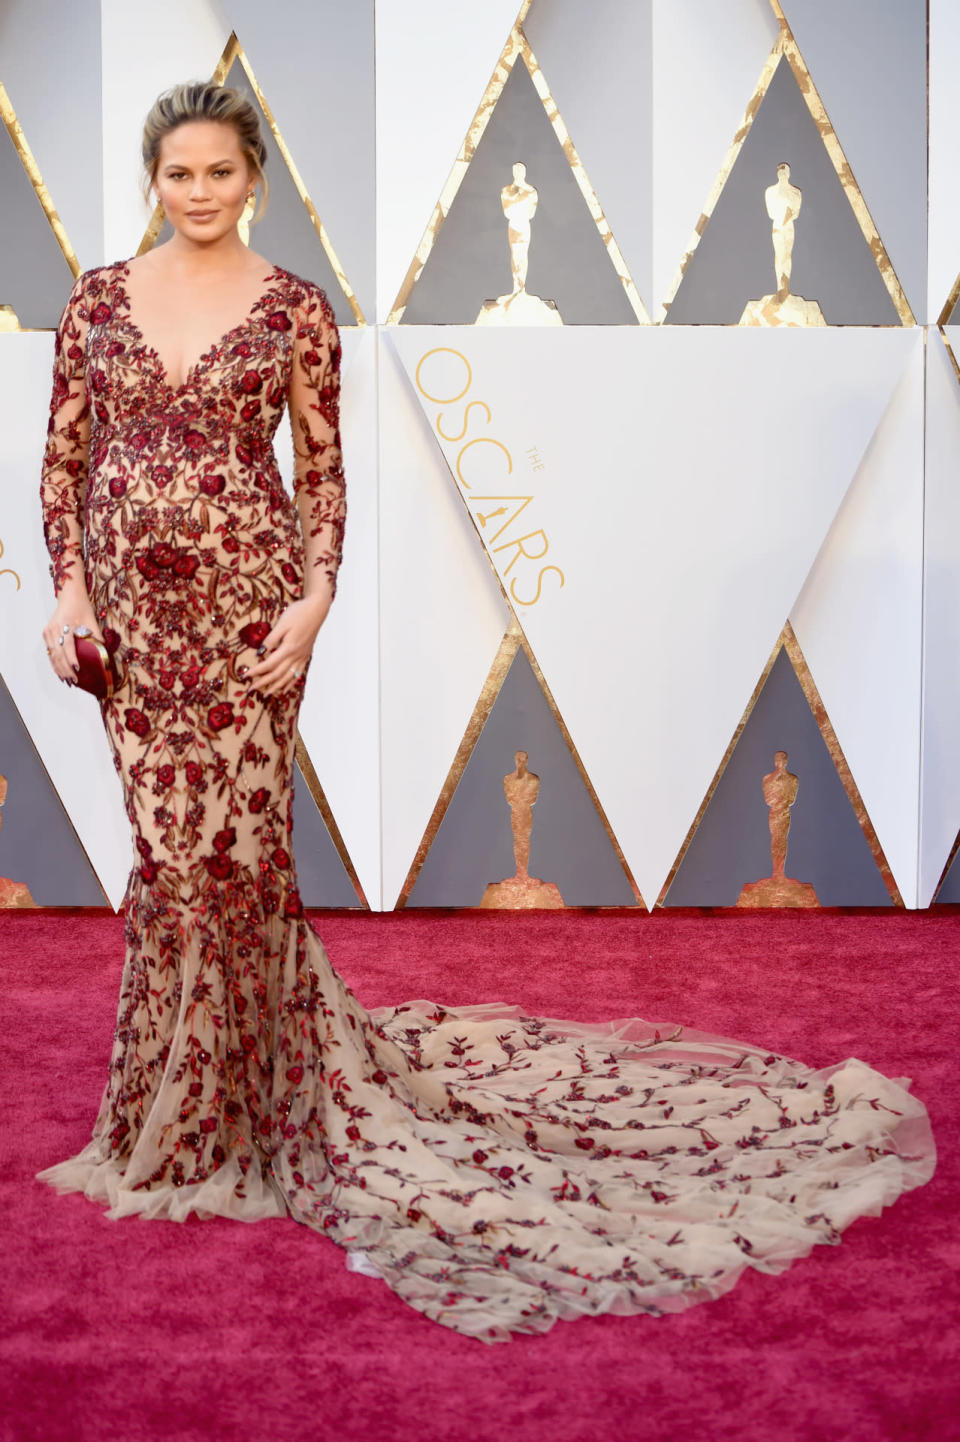 <p>Pregnant Chrissy Teigen wore a Marchesa naked dress to the Oscars, where her husband, John Legend, presented an award with collaborator Common. <i><i>(Photo: Getty Images)</i></i></p>